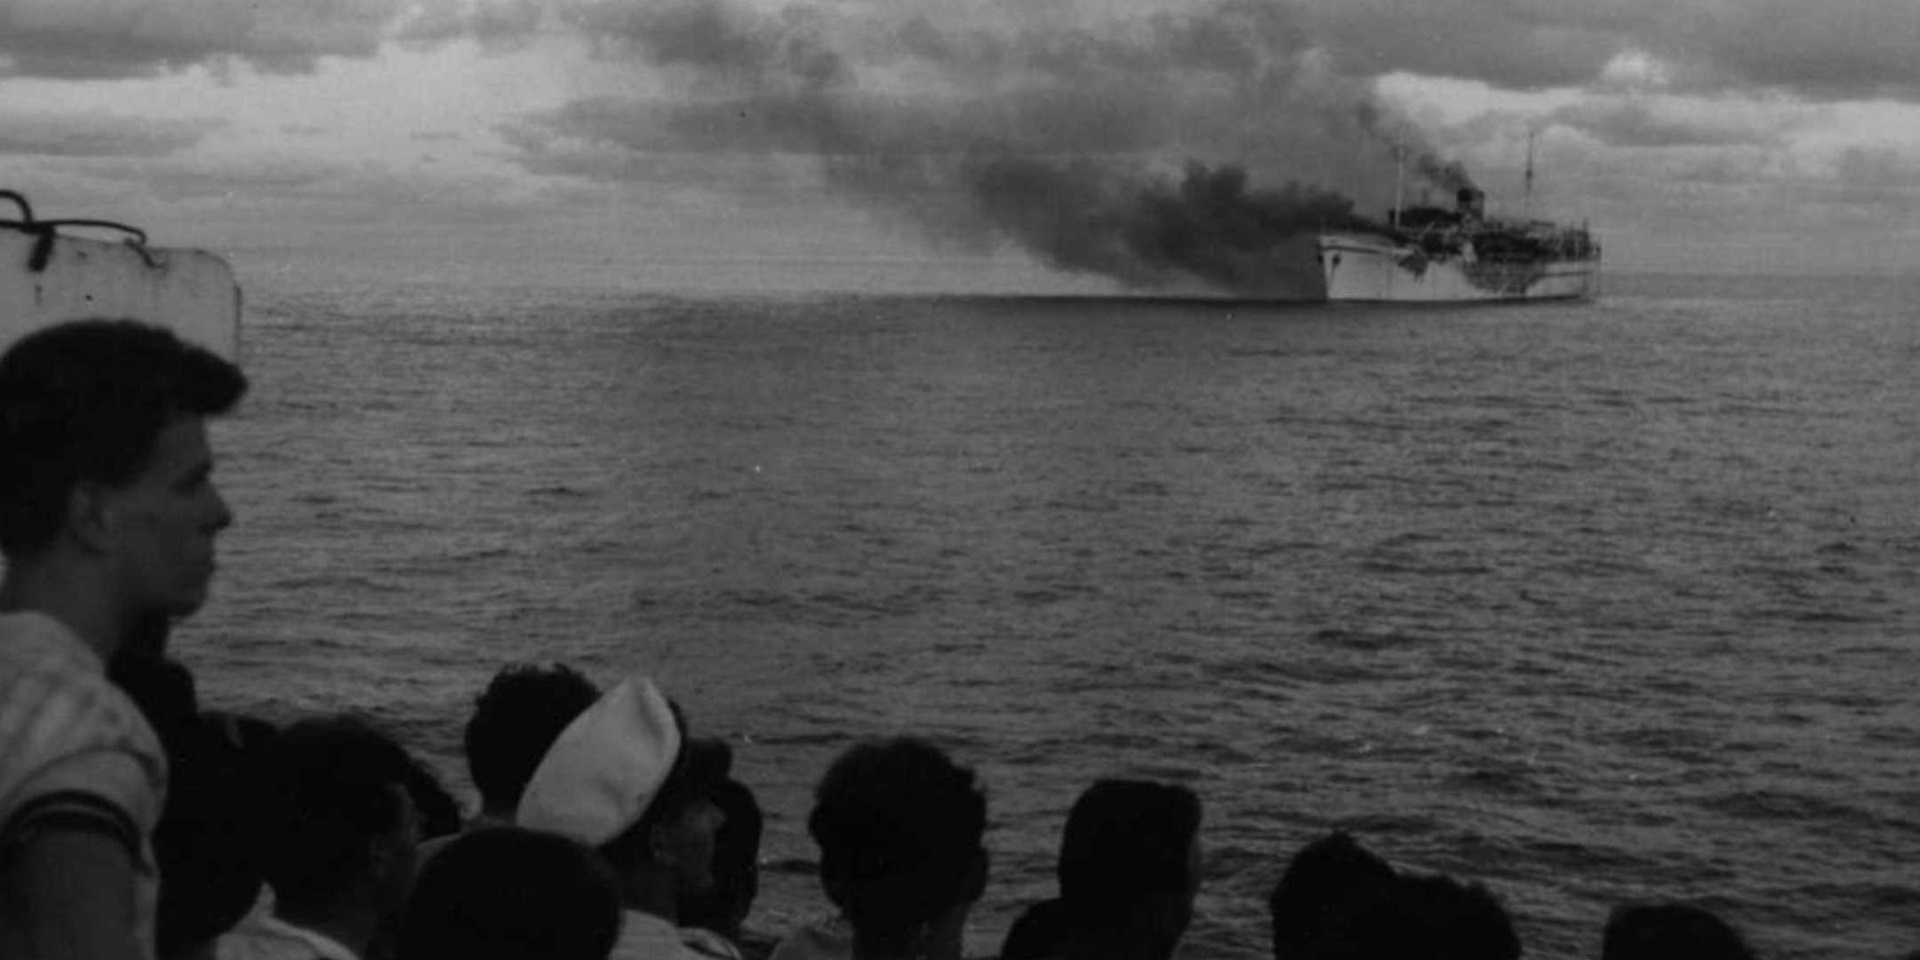 Passengers watch from the deck of City of Sydney as Skaubryn burns in the Indian Ocean, 1958. ANMM Collection Gift from Barbara Alysen ANMS0214[005]. Reproduced courtesy International Organisation for Migration